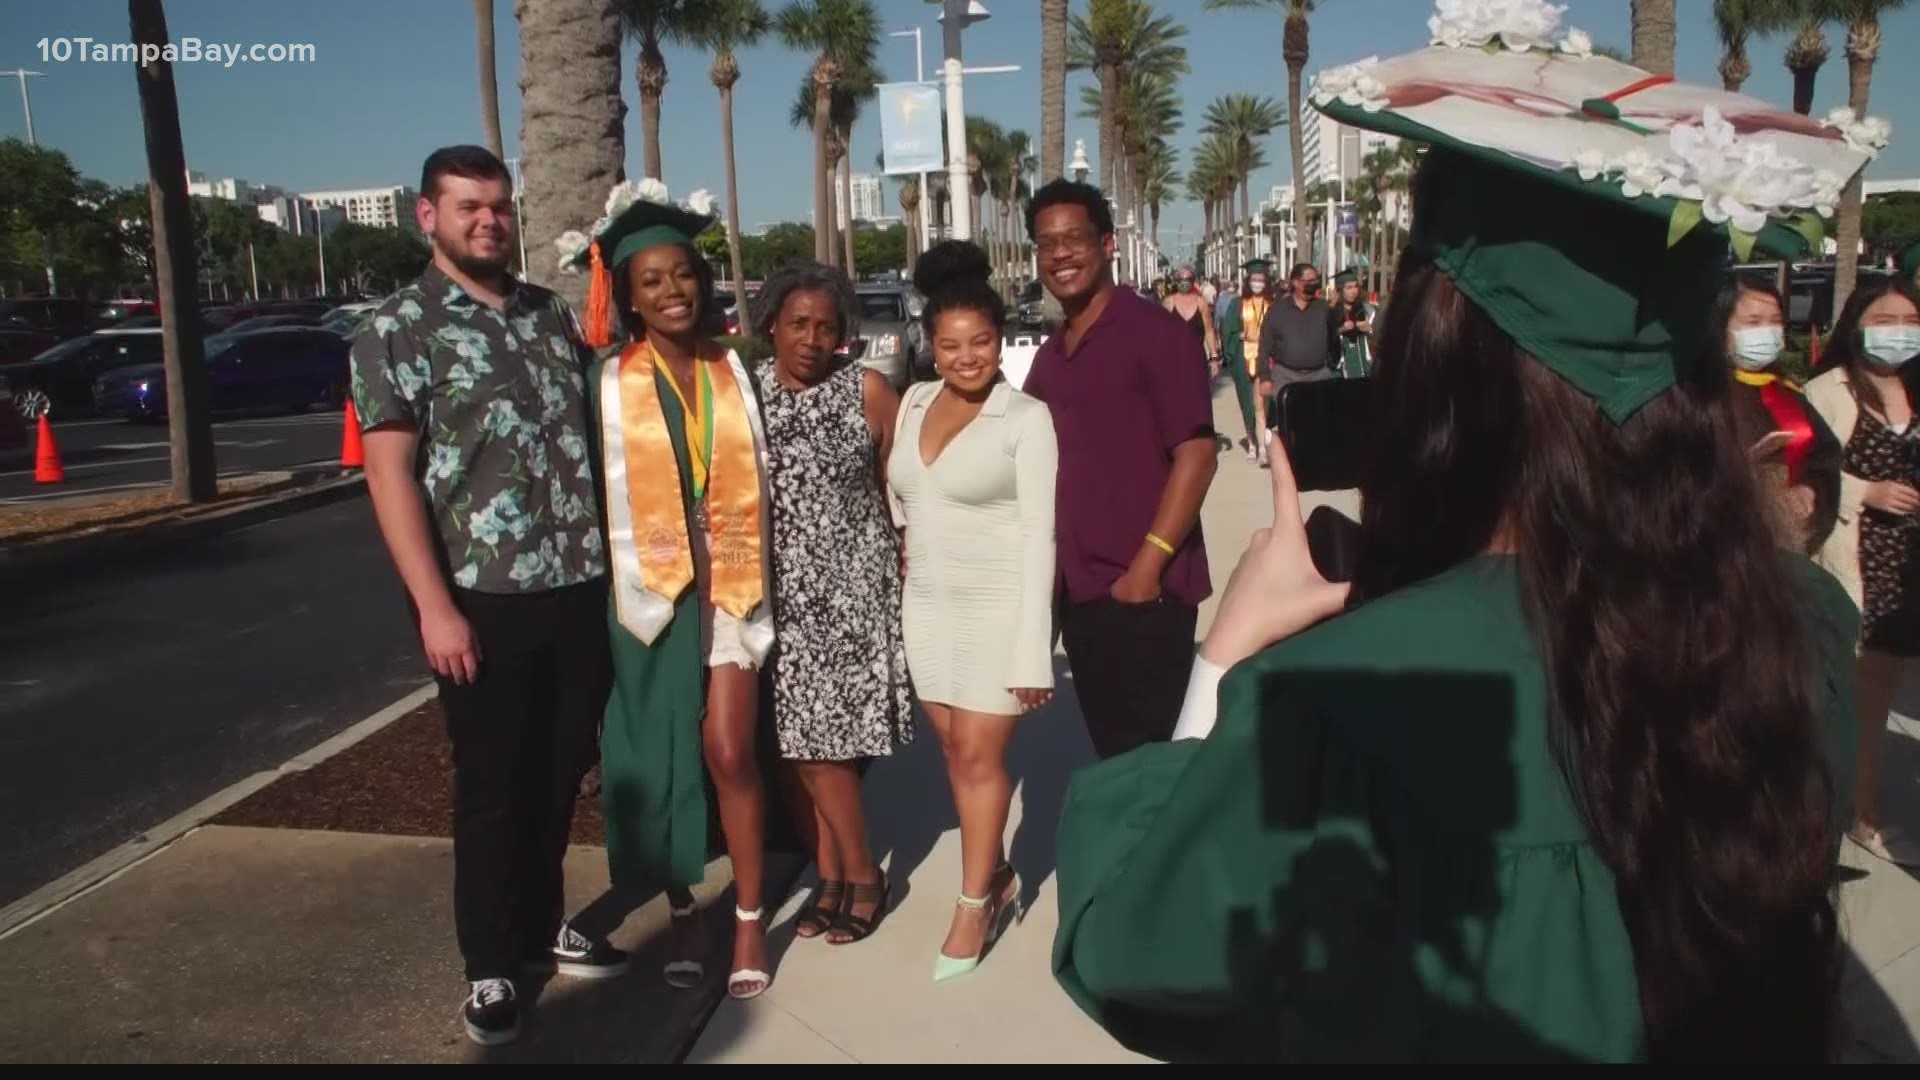 USF has first inperson graduation since COVID pandemic began